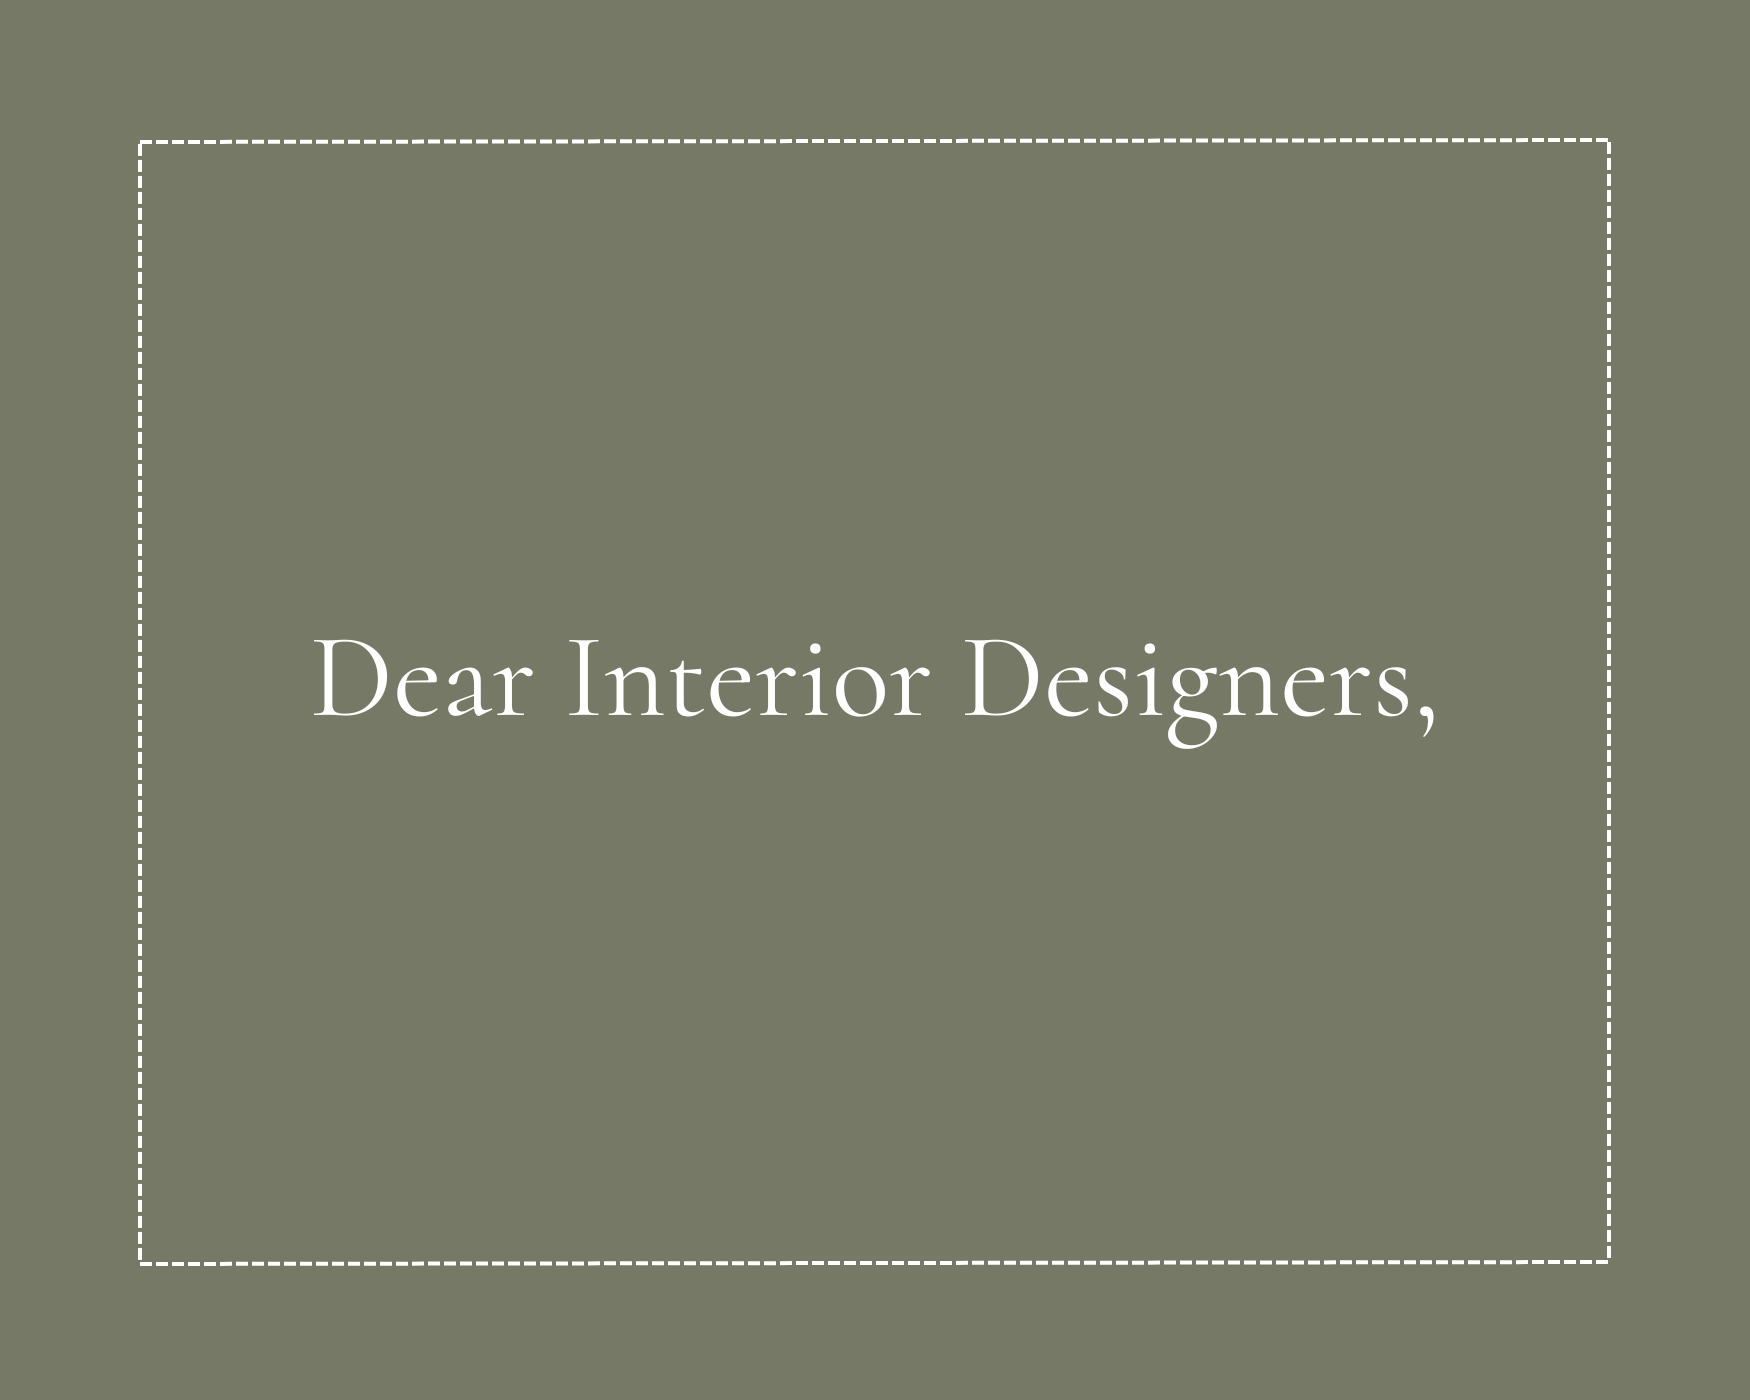 A Letter to Interior Designers